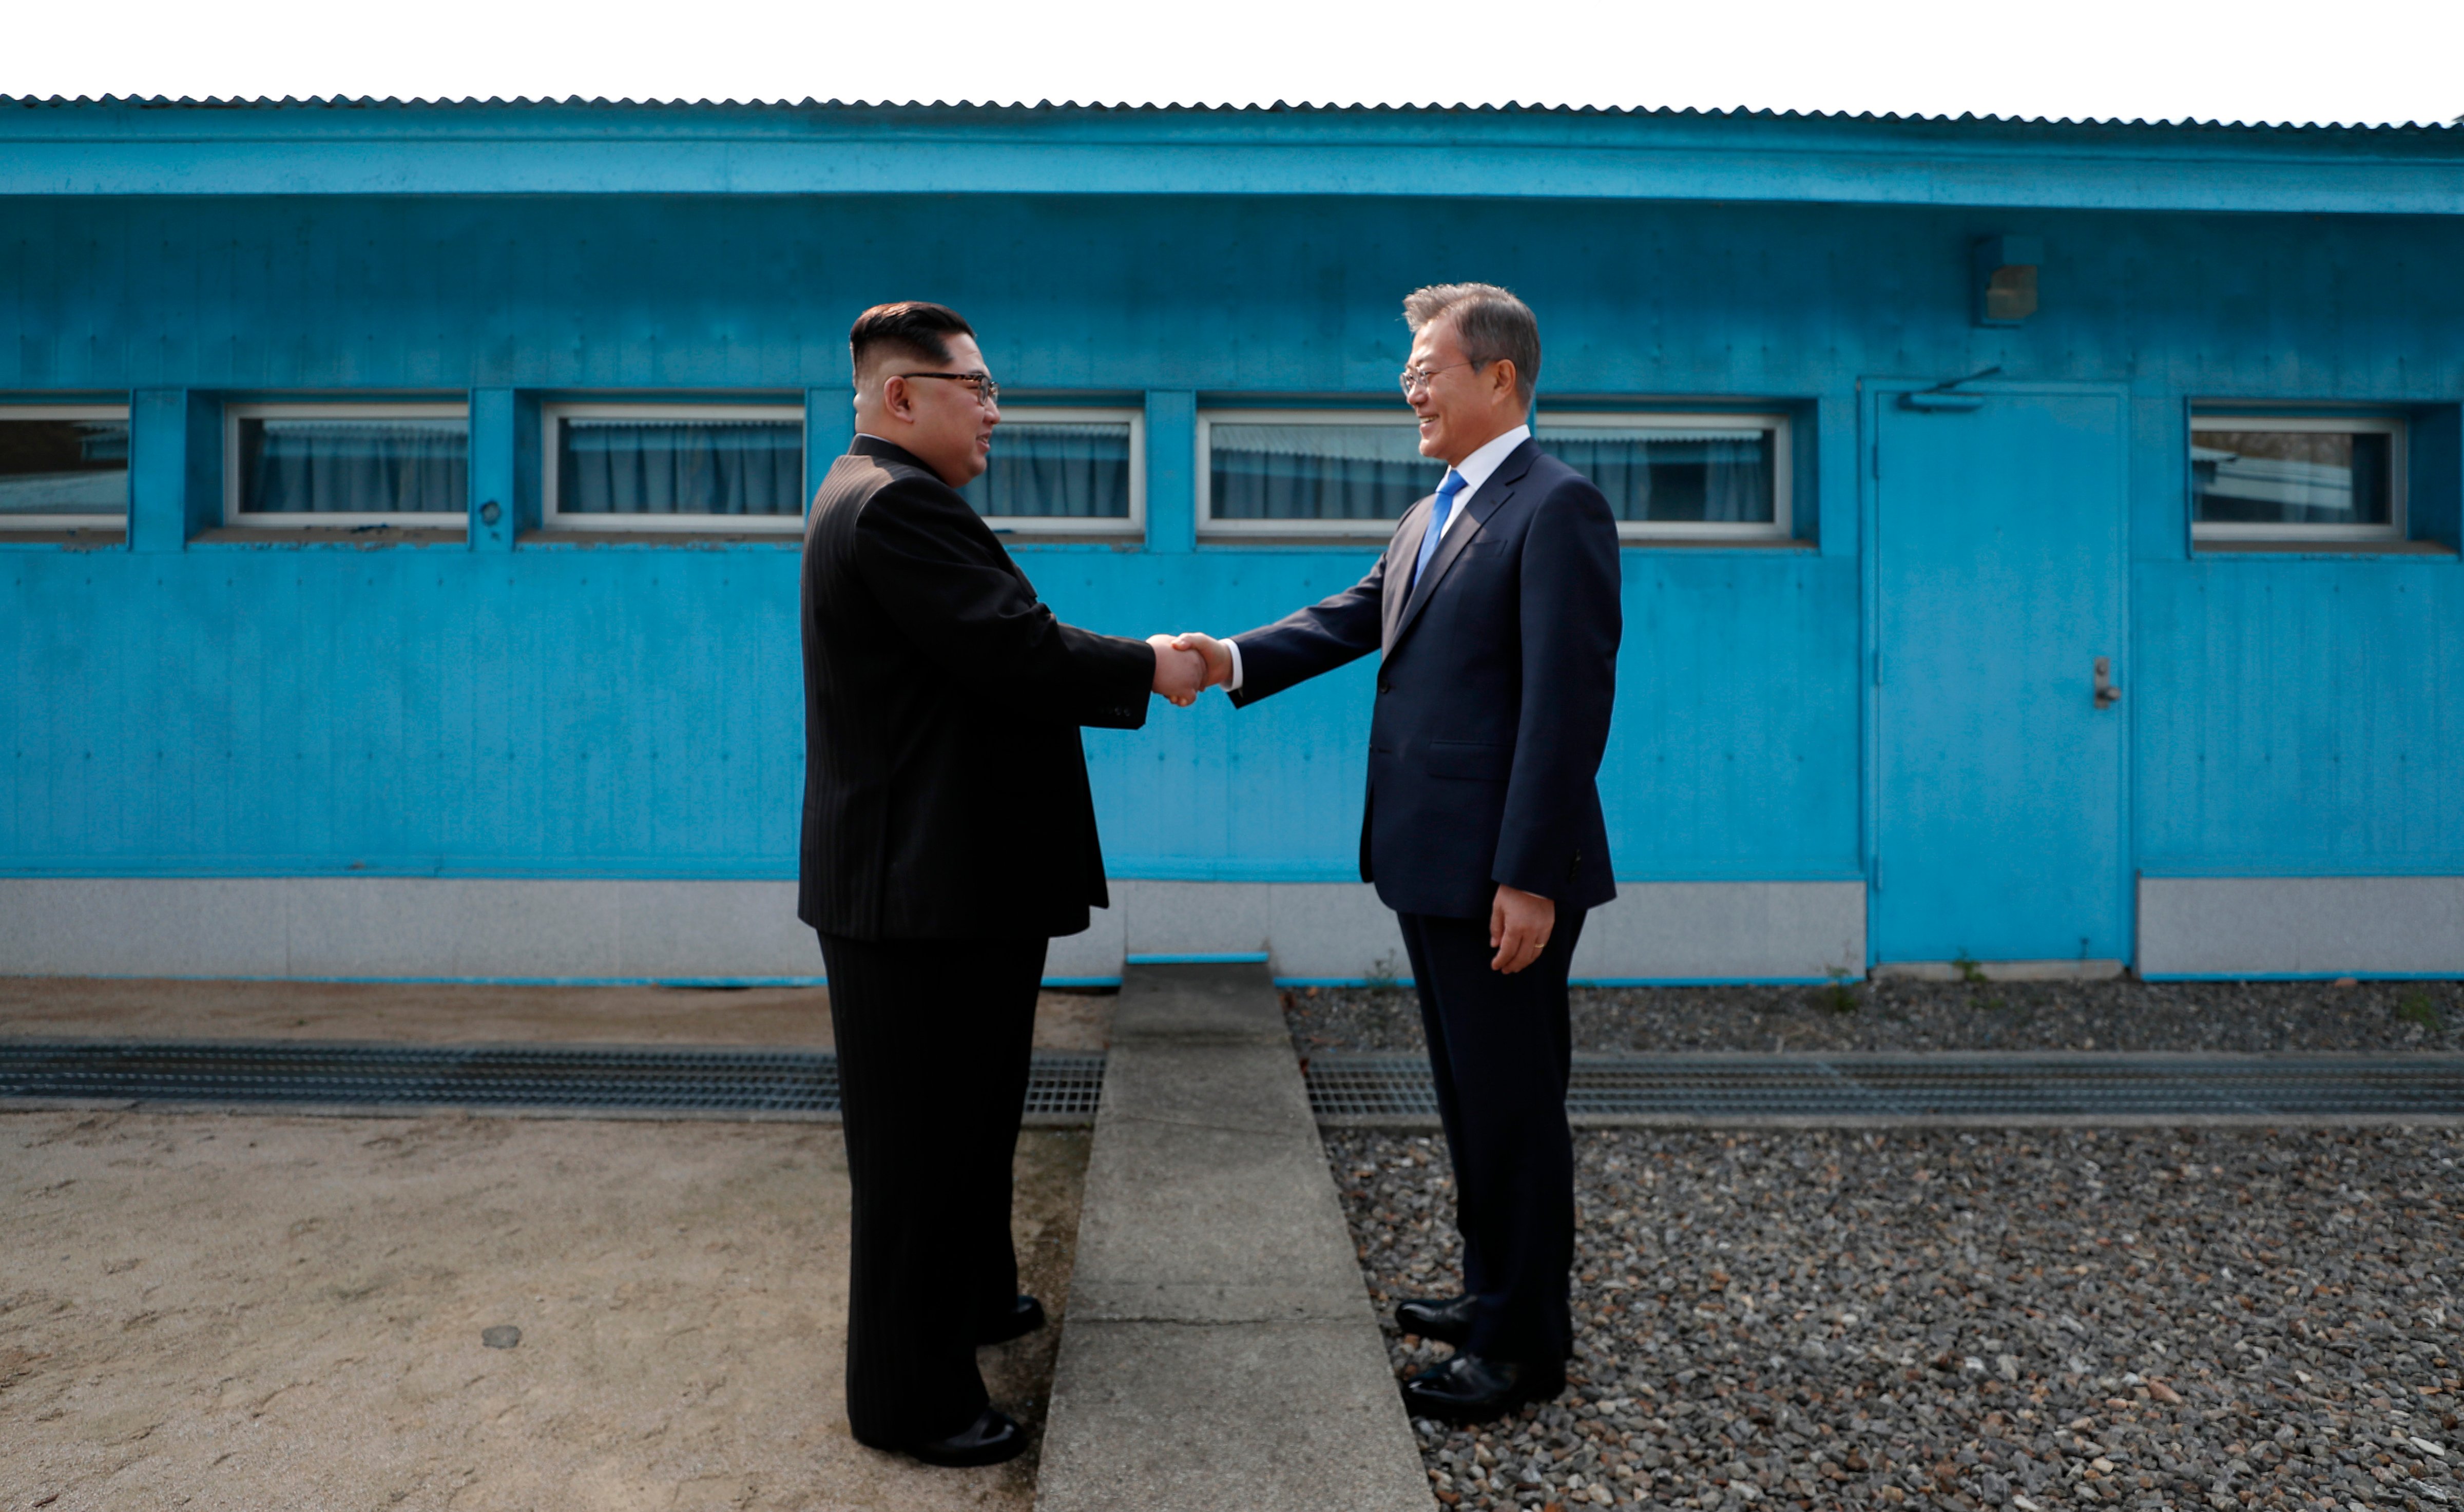 North Korea's leader Kim Jong Un shakes hands with South Korea's President Moon Jae-in at the Military Demarcation Line that divides their countries ahead of their summit at the truce village of Panmunjom on April 27, 2018. (Korea Summit Press Pool&mdash;AFP/Getty Images)